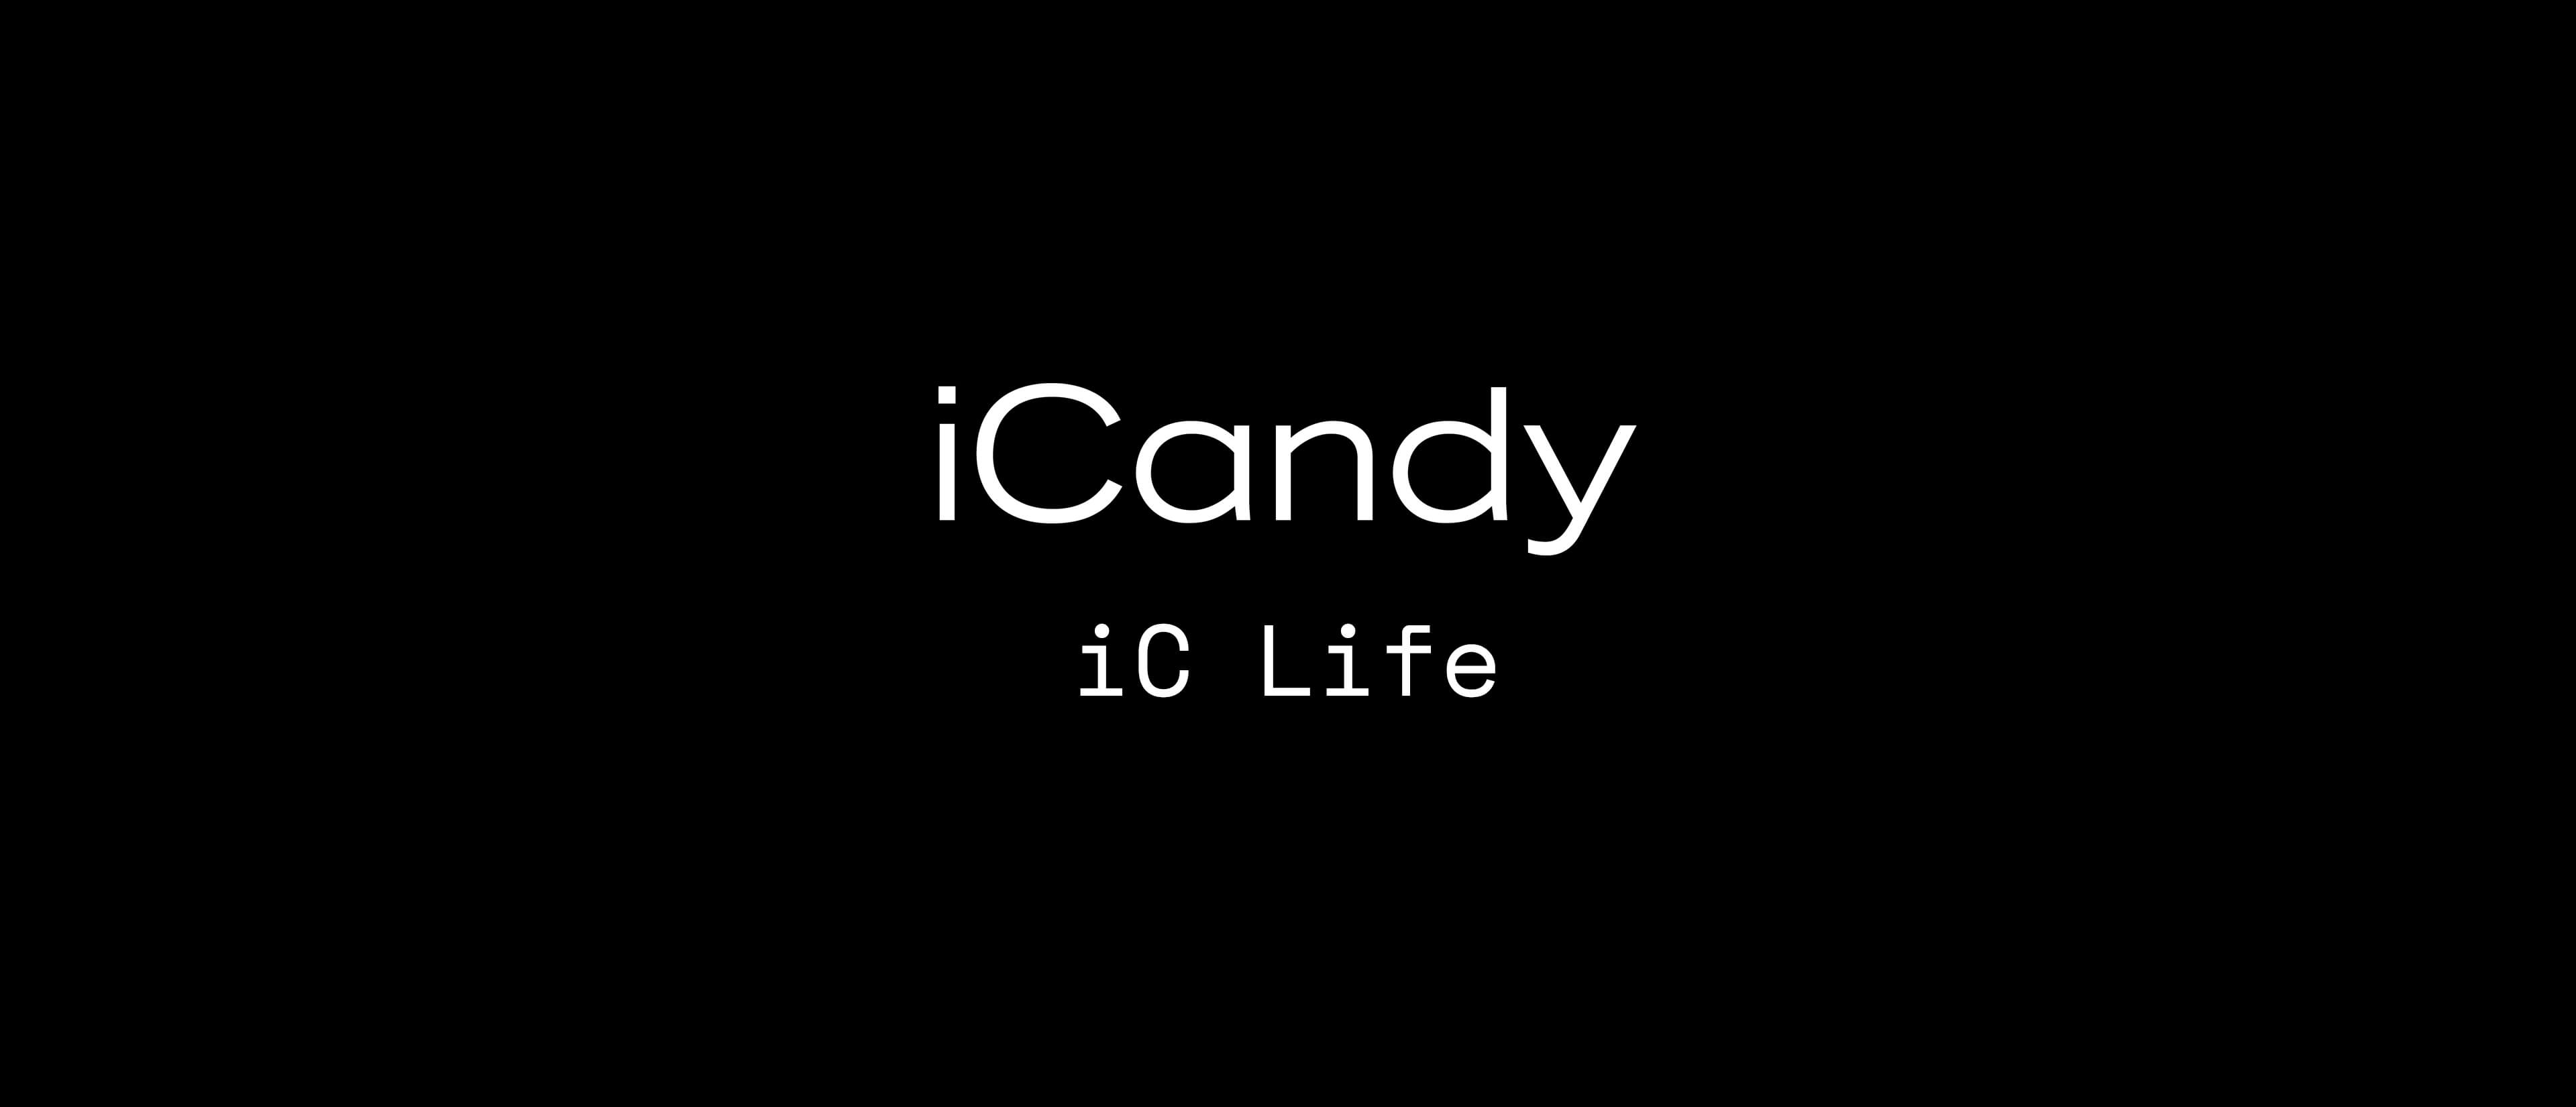 The new iCandy Peach arrives at the ExCel Exhibition centre